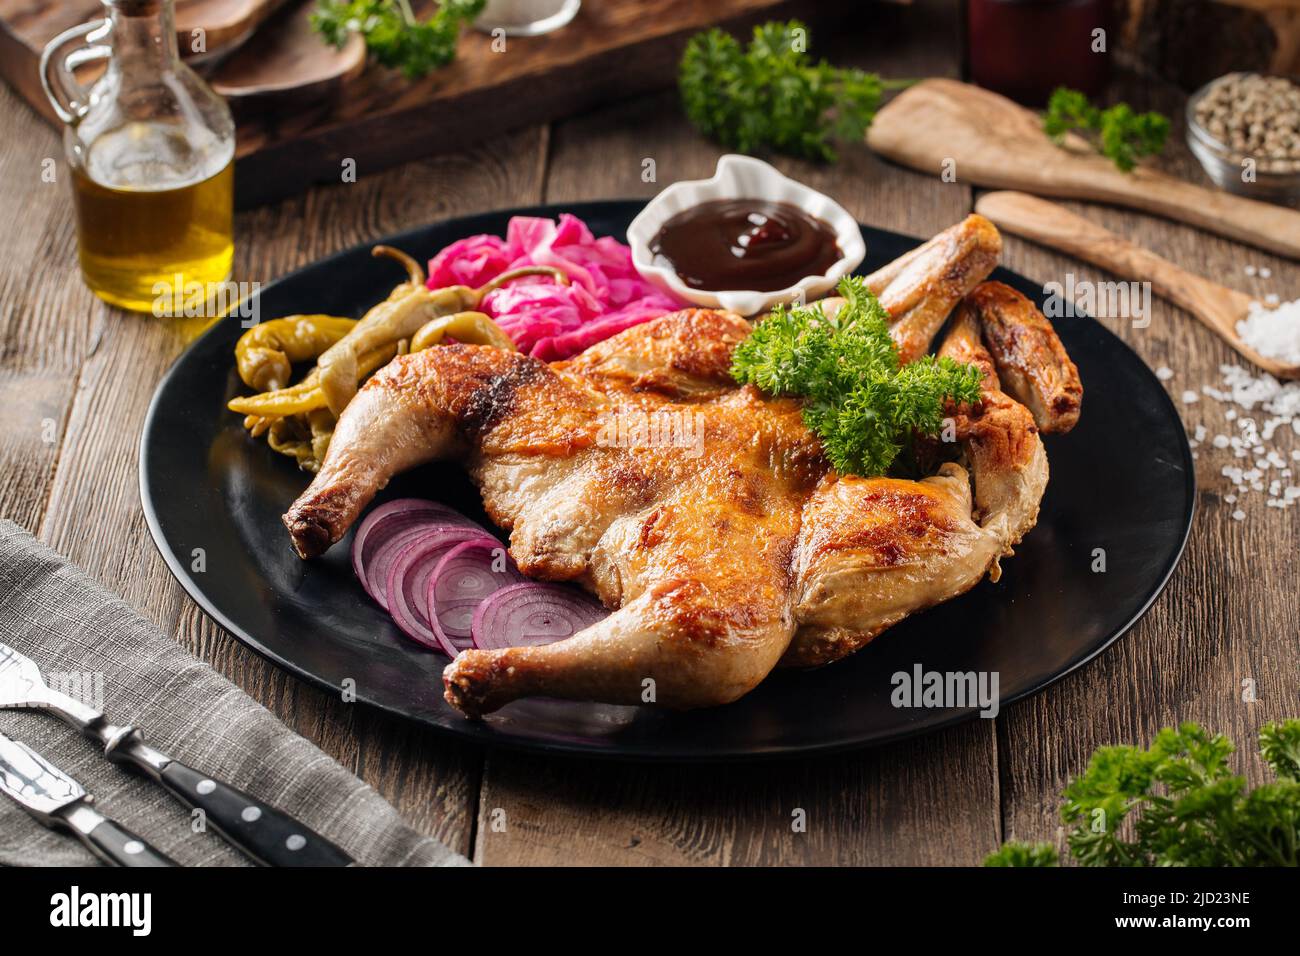 Portion of chicken tobacco dish with sauce Stock Photo - Alamy